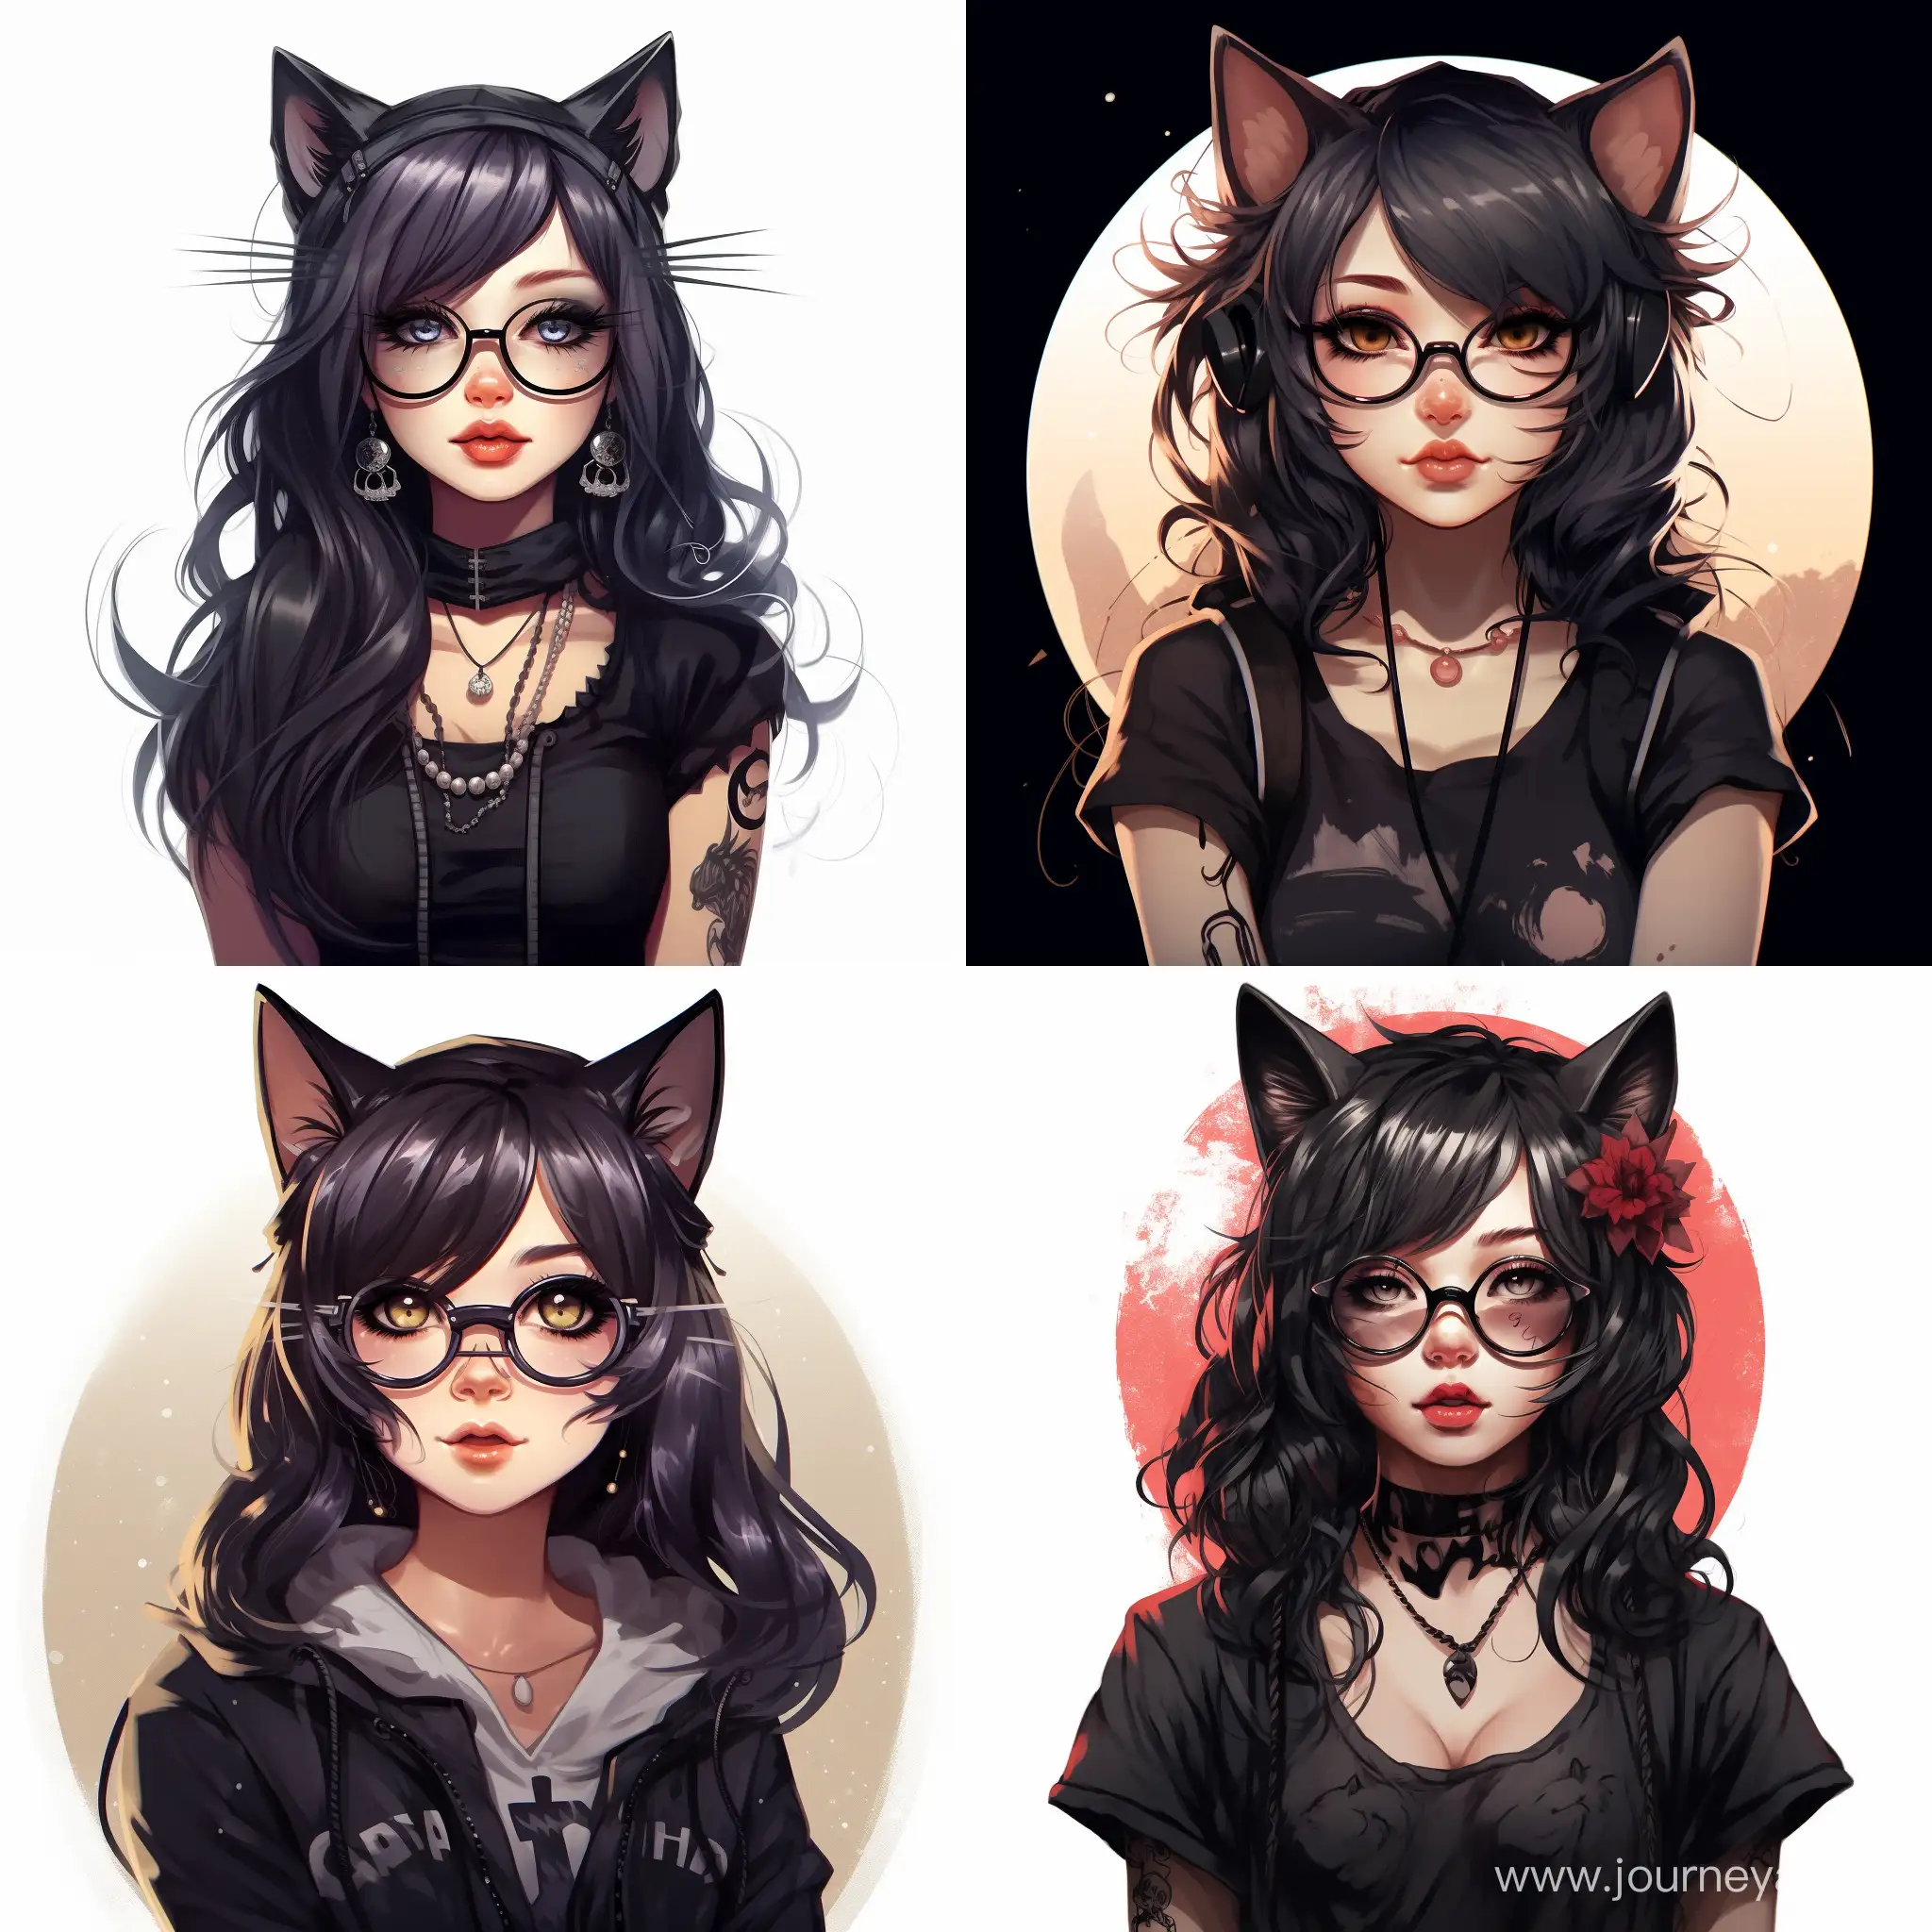 an anime style girl with cat ears, wearing glasses, black hair, tatoo, goth style